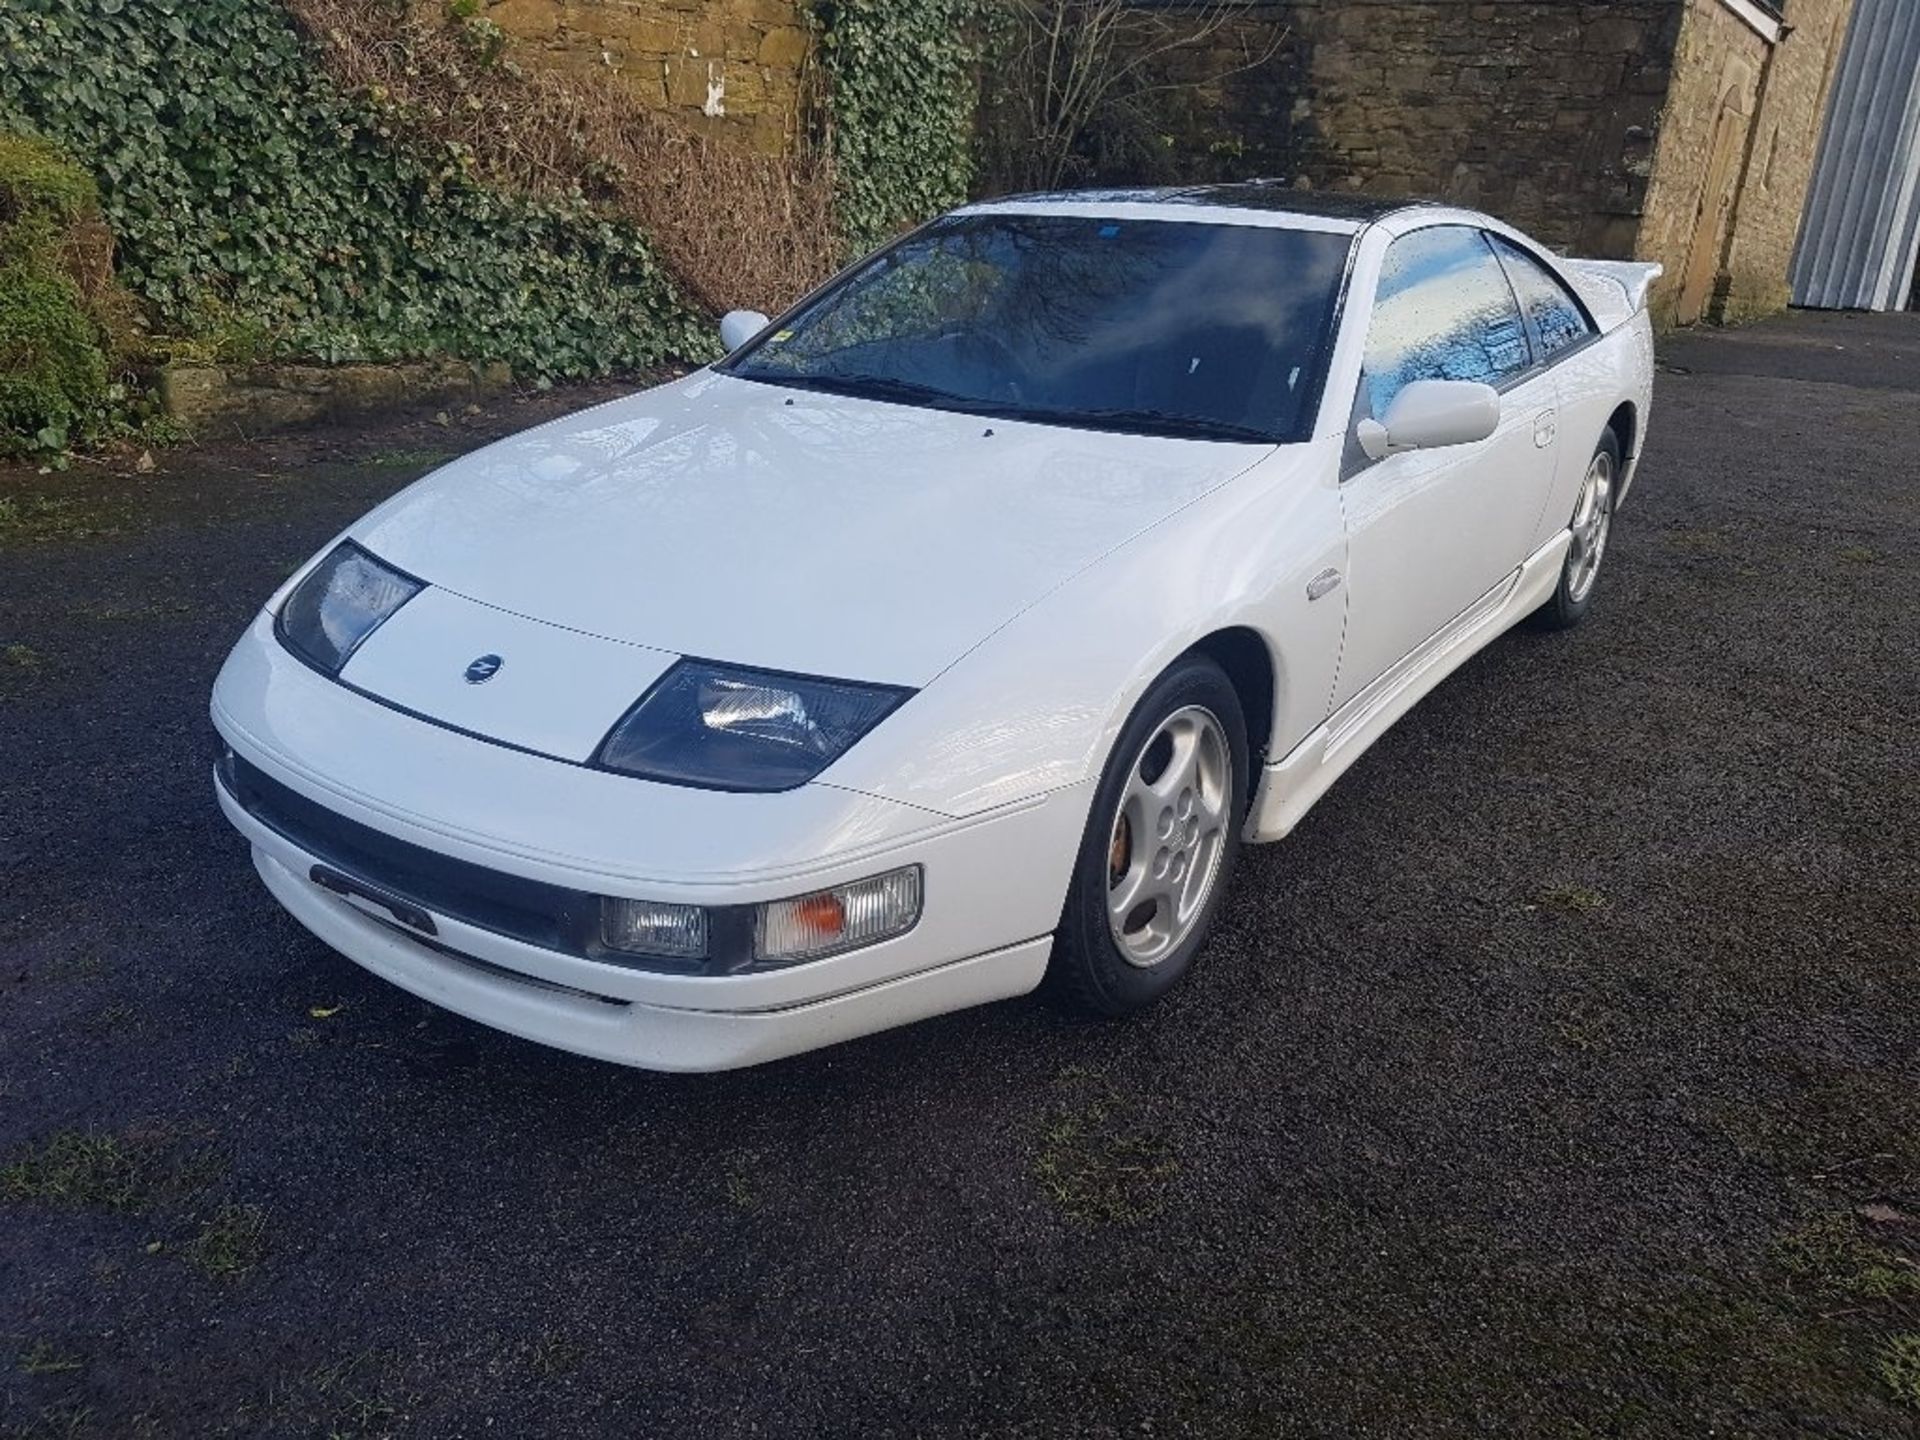 NISSAN, FAIRLADY, IMPORT 1996 MODEL, UNREGISTERED (READY TO REGISTER), 3.0 LITRE V6, PETROL, AUTO, 2 - Image 3 of 15